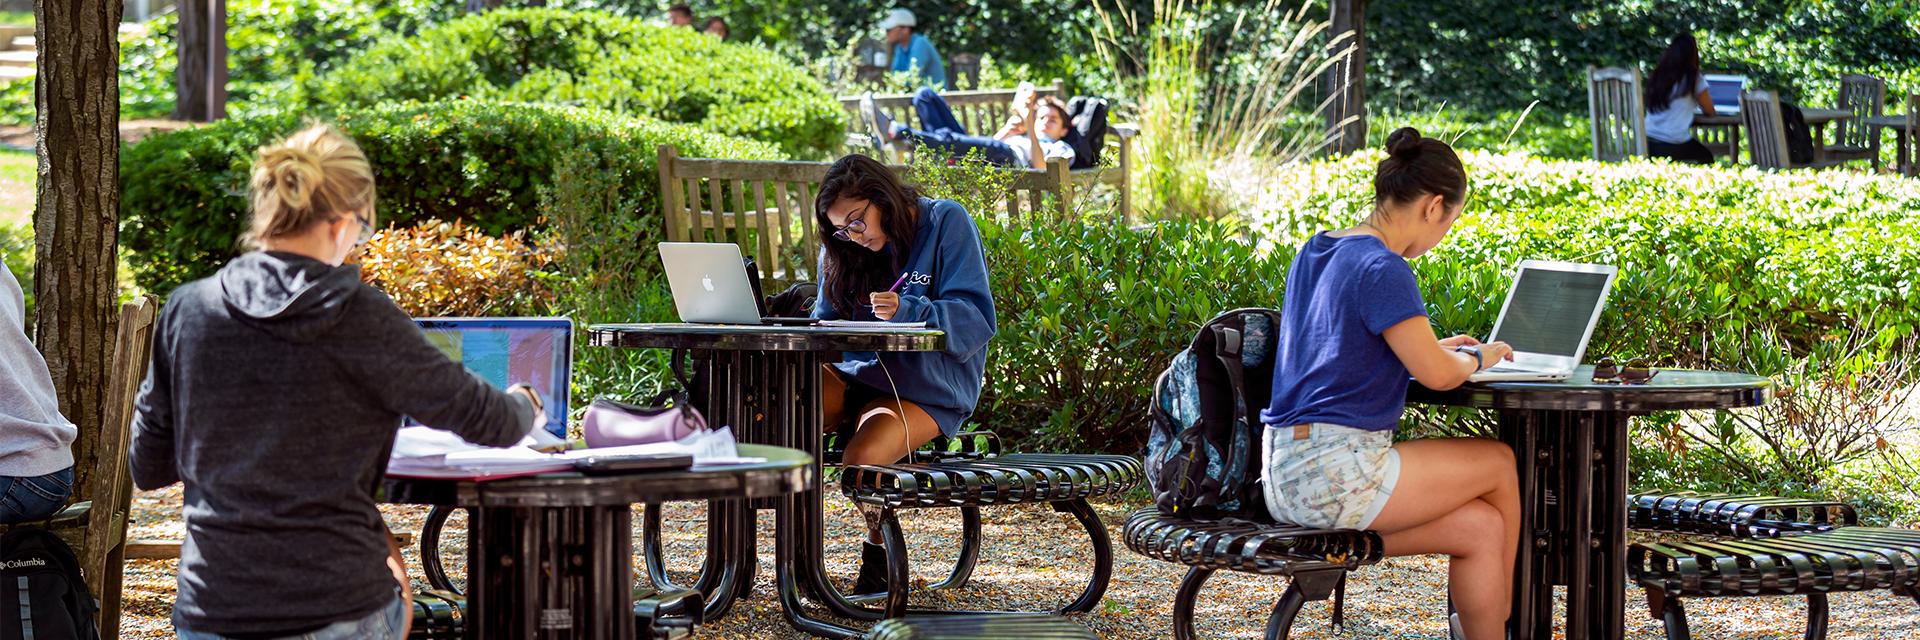 Students using laptops at outdoor tables